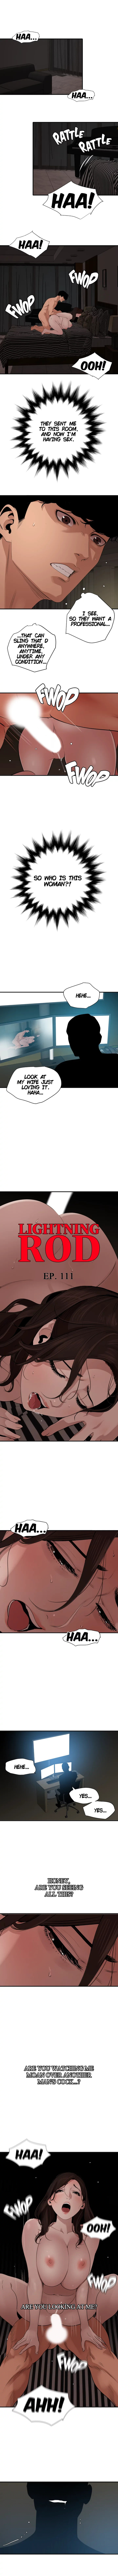 Lightning Rod - Chapter 111 Page 1